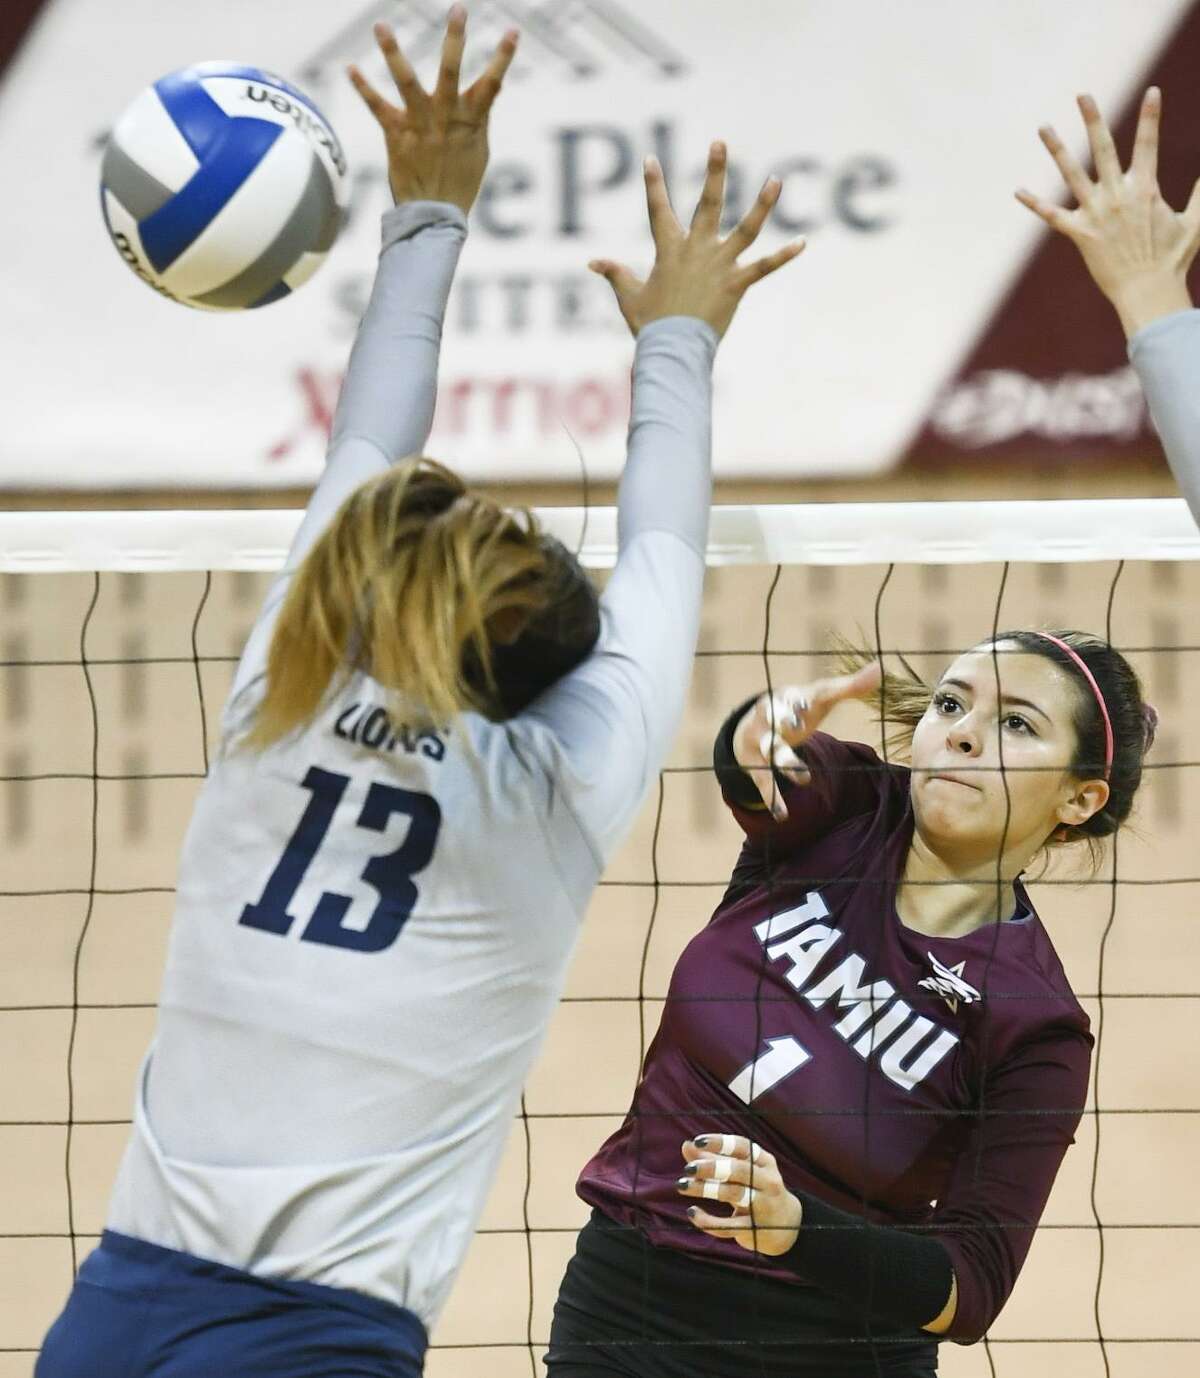 Samantha Herrera had a double-double with a team-best 10 kills and 10 digs on Thursday night as TAMIU fell 3-0 at first-place Lubbock Christian.